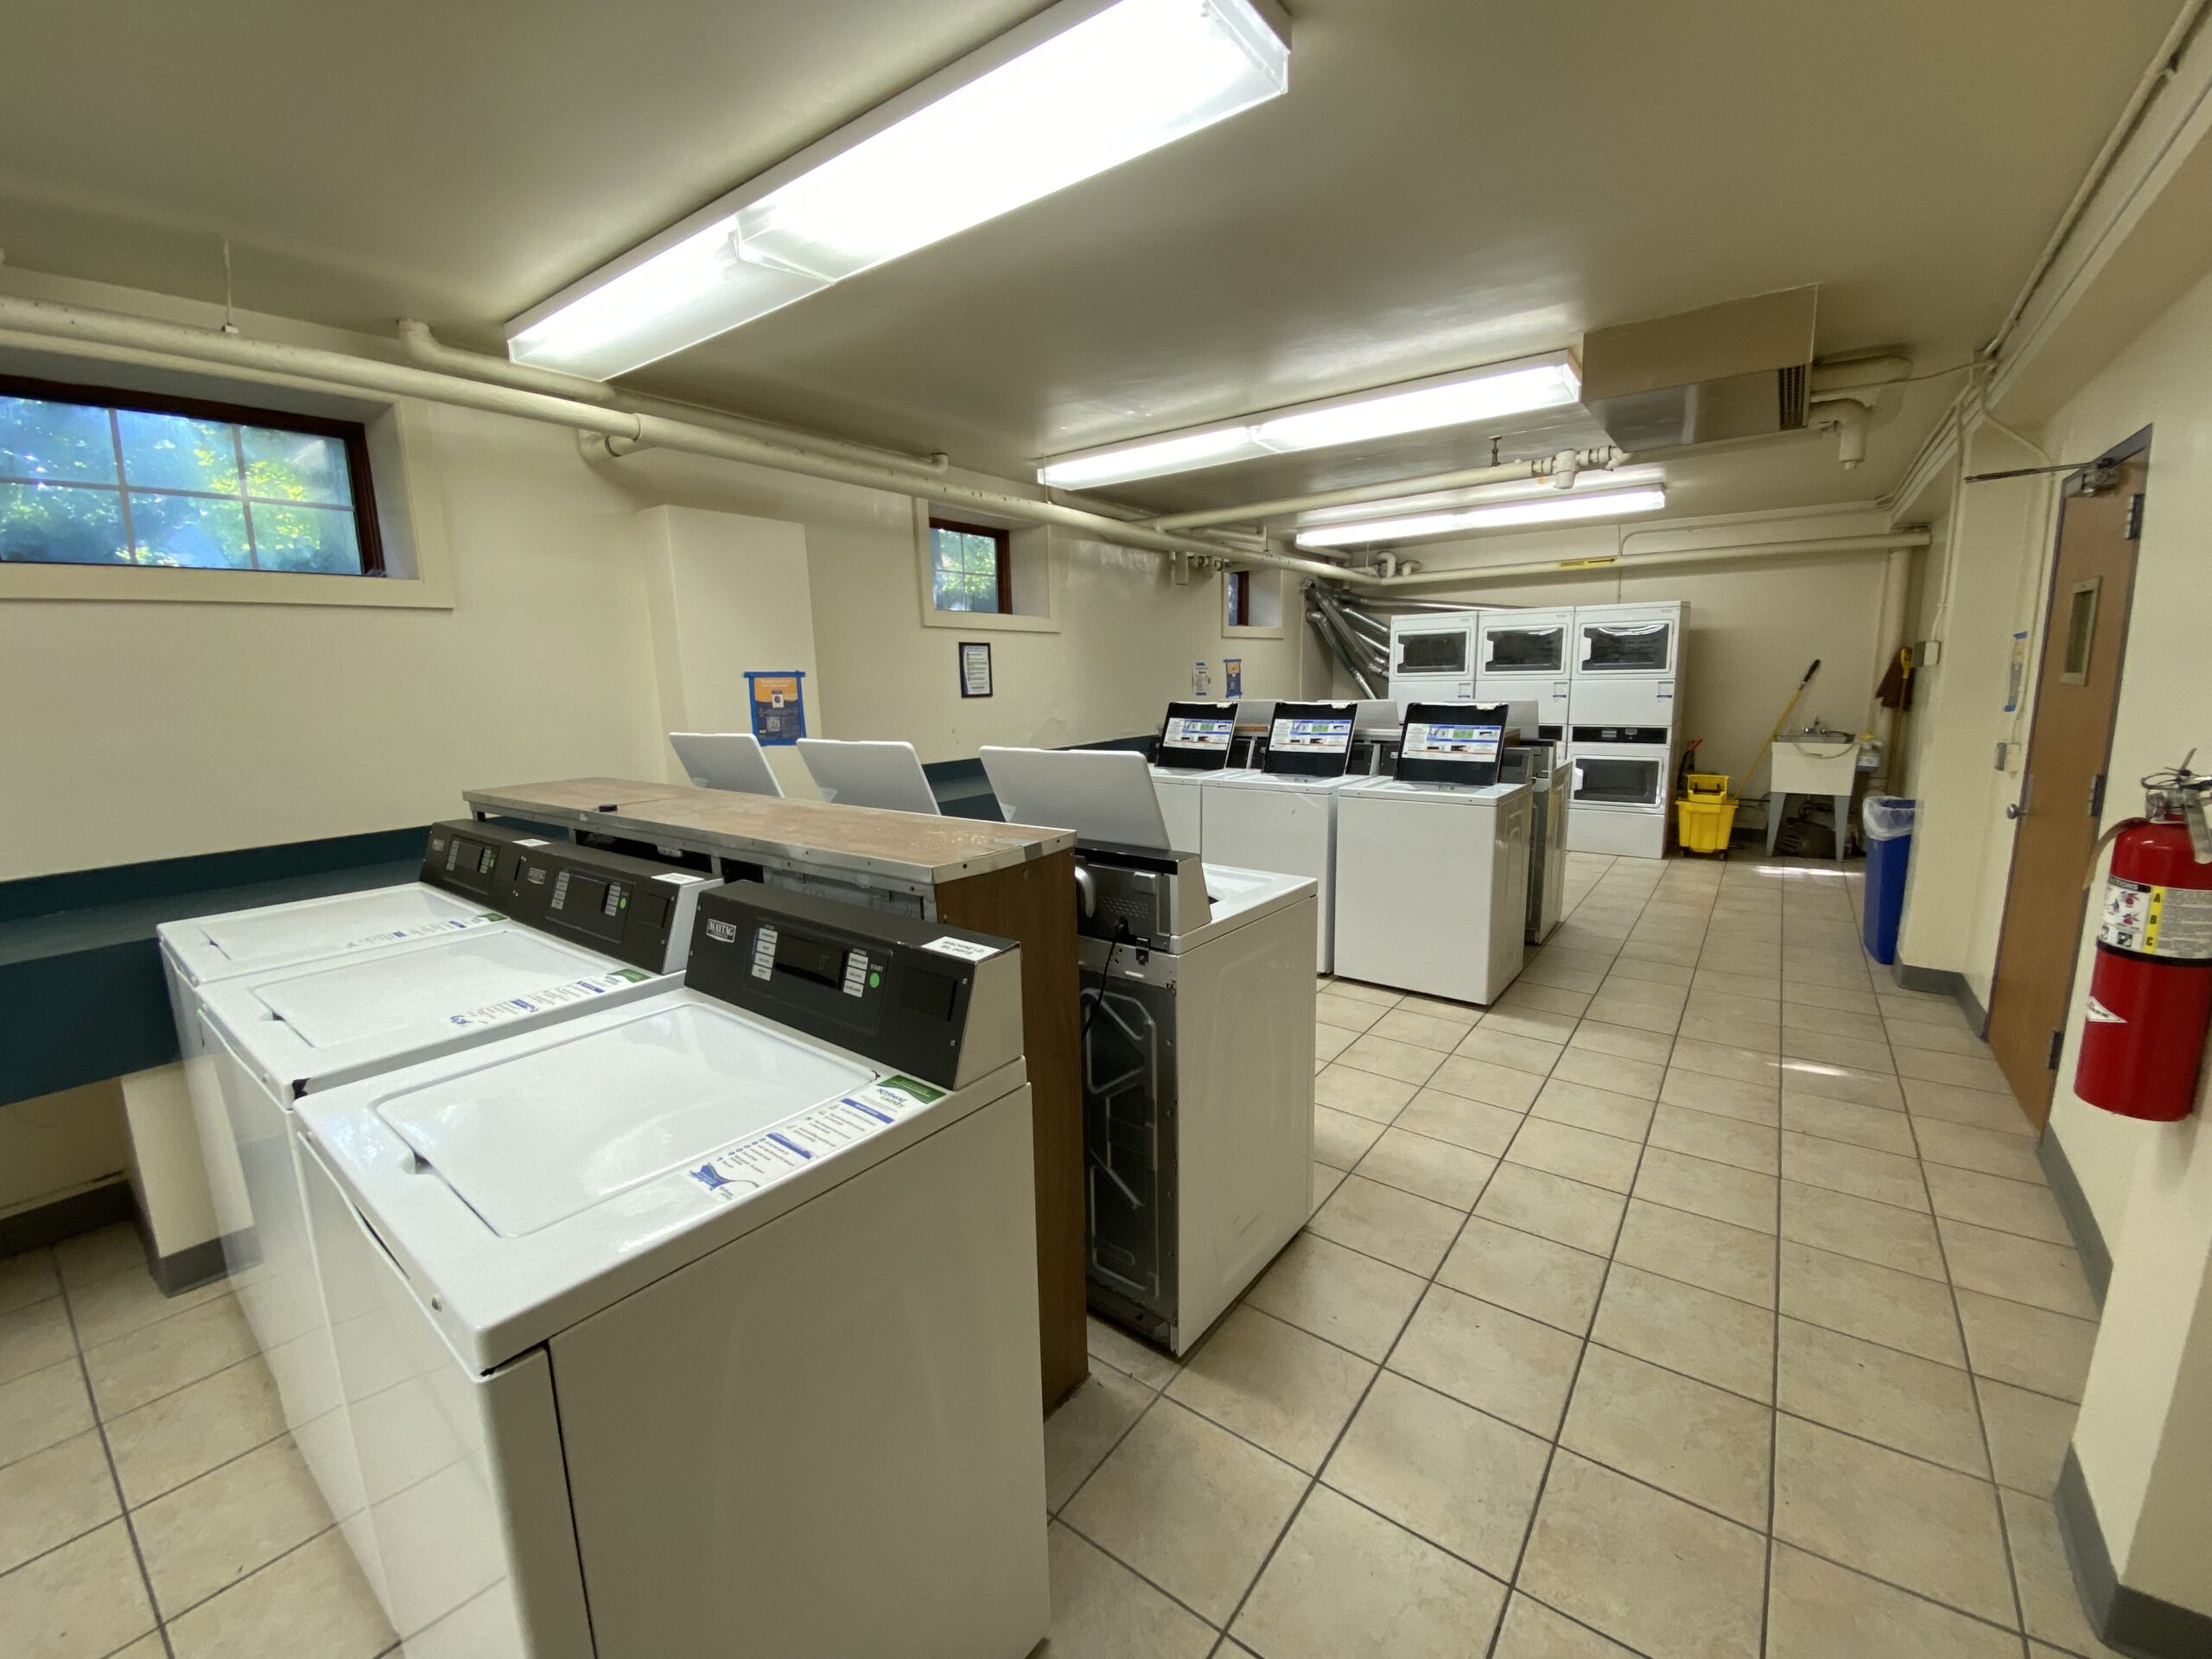 Wesley laundry room